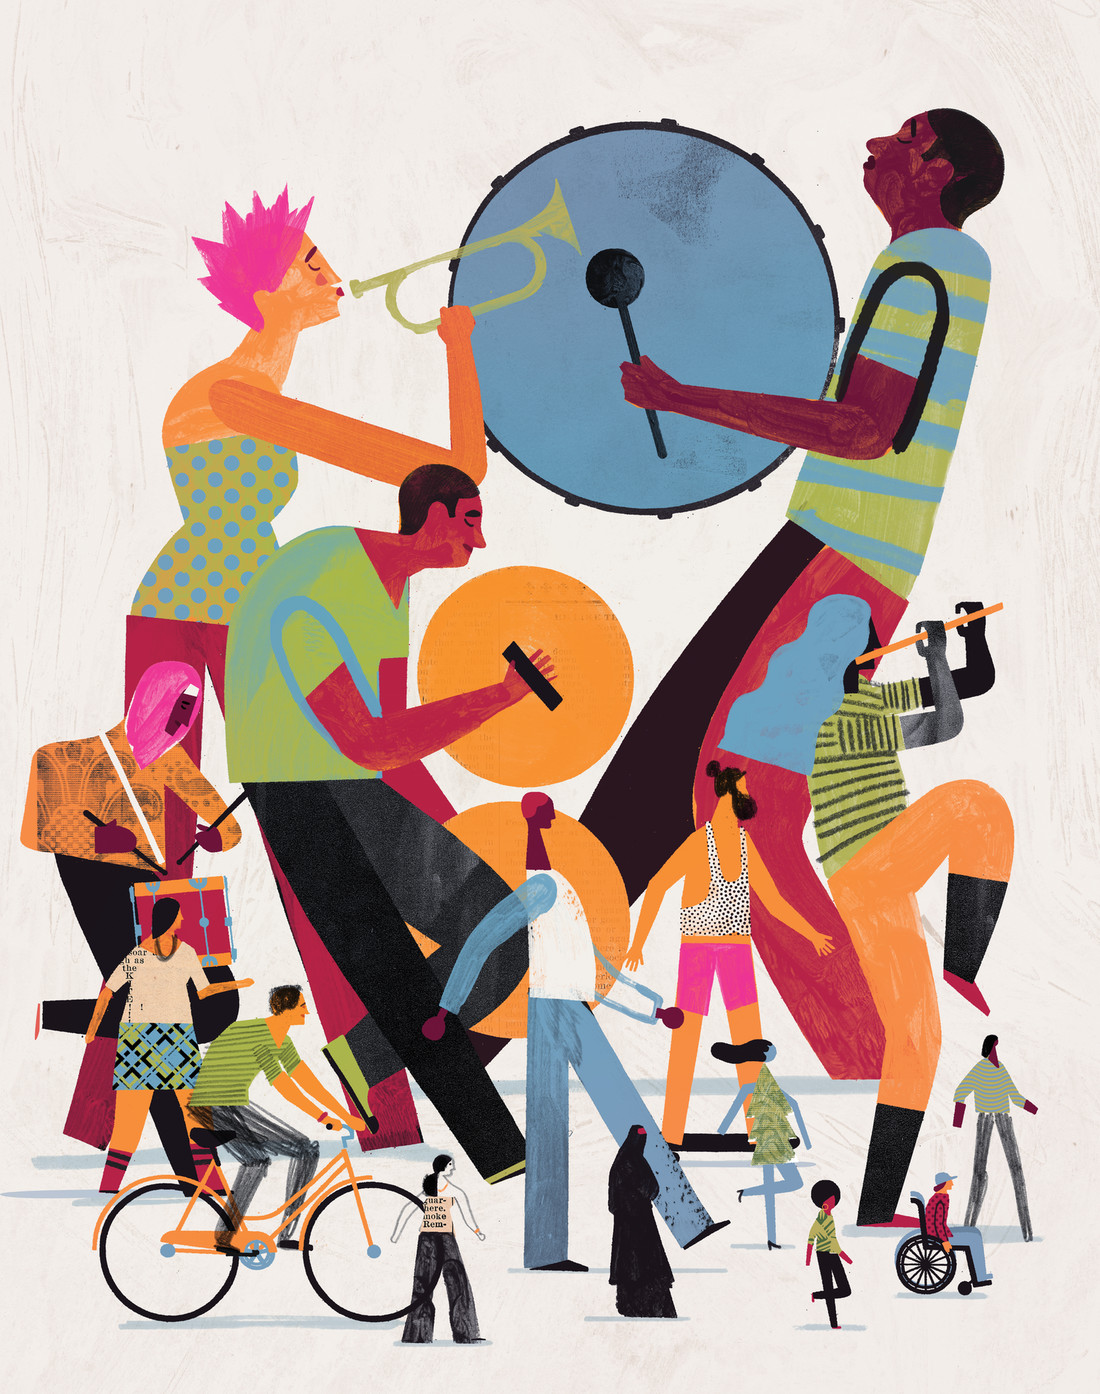 Abstract drawing of a diverse marching band